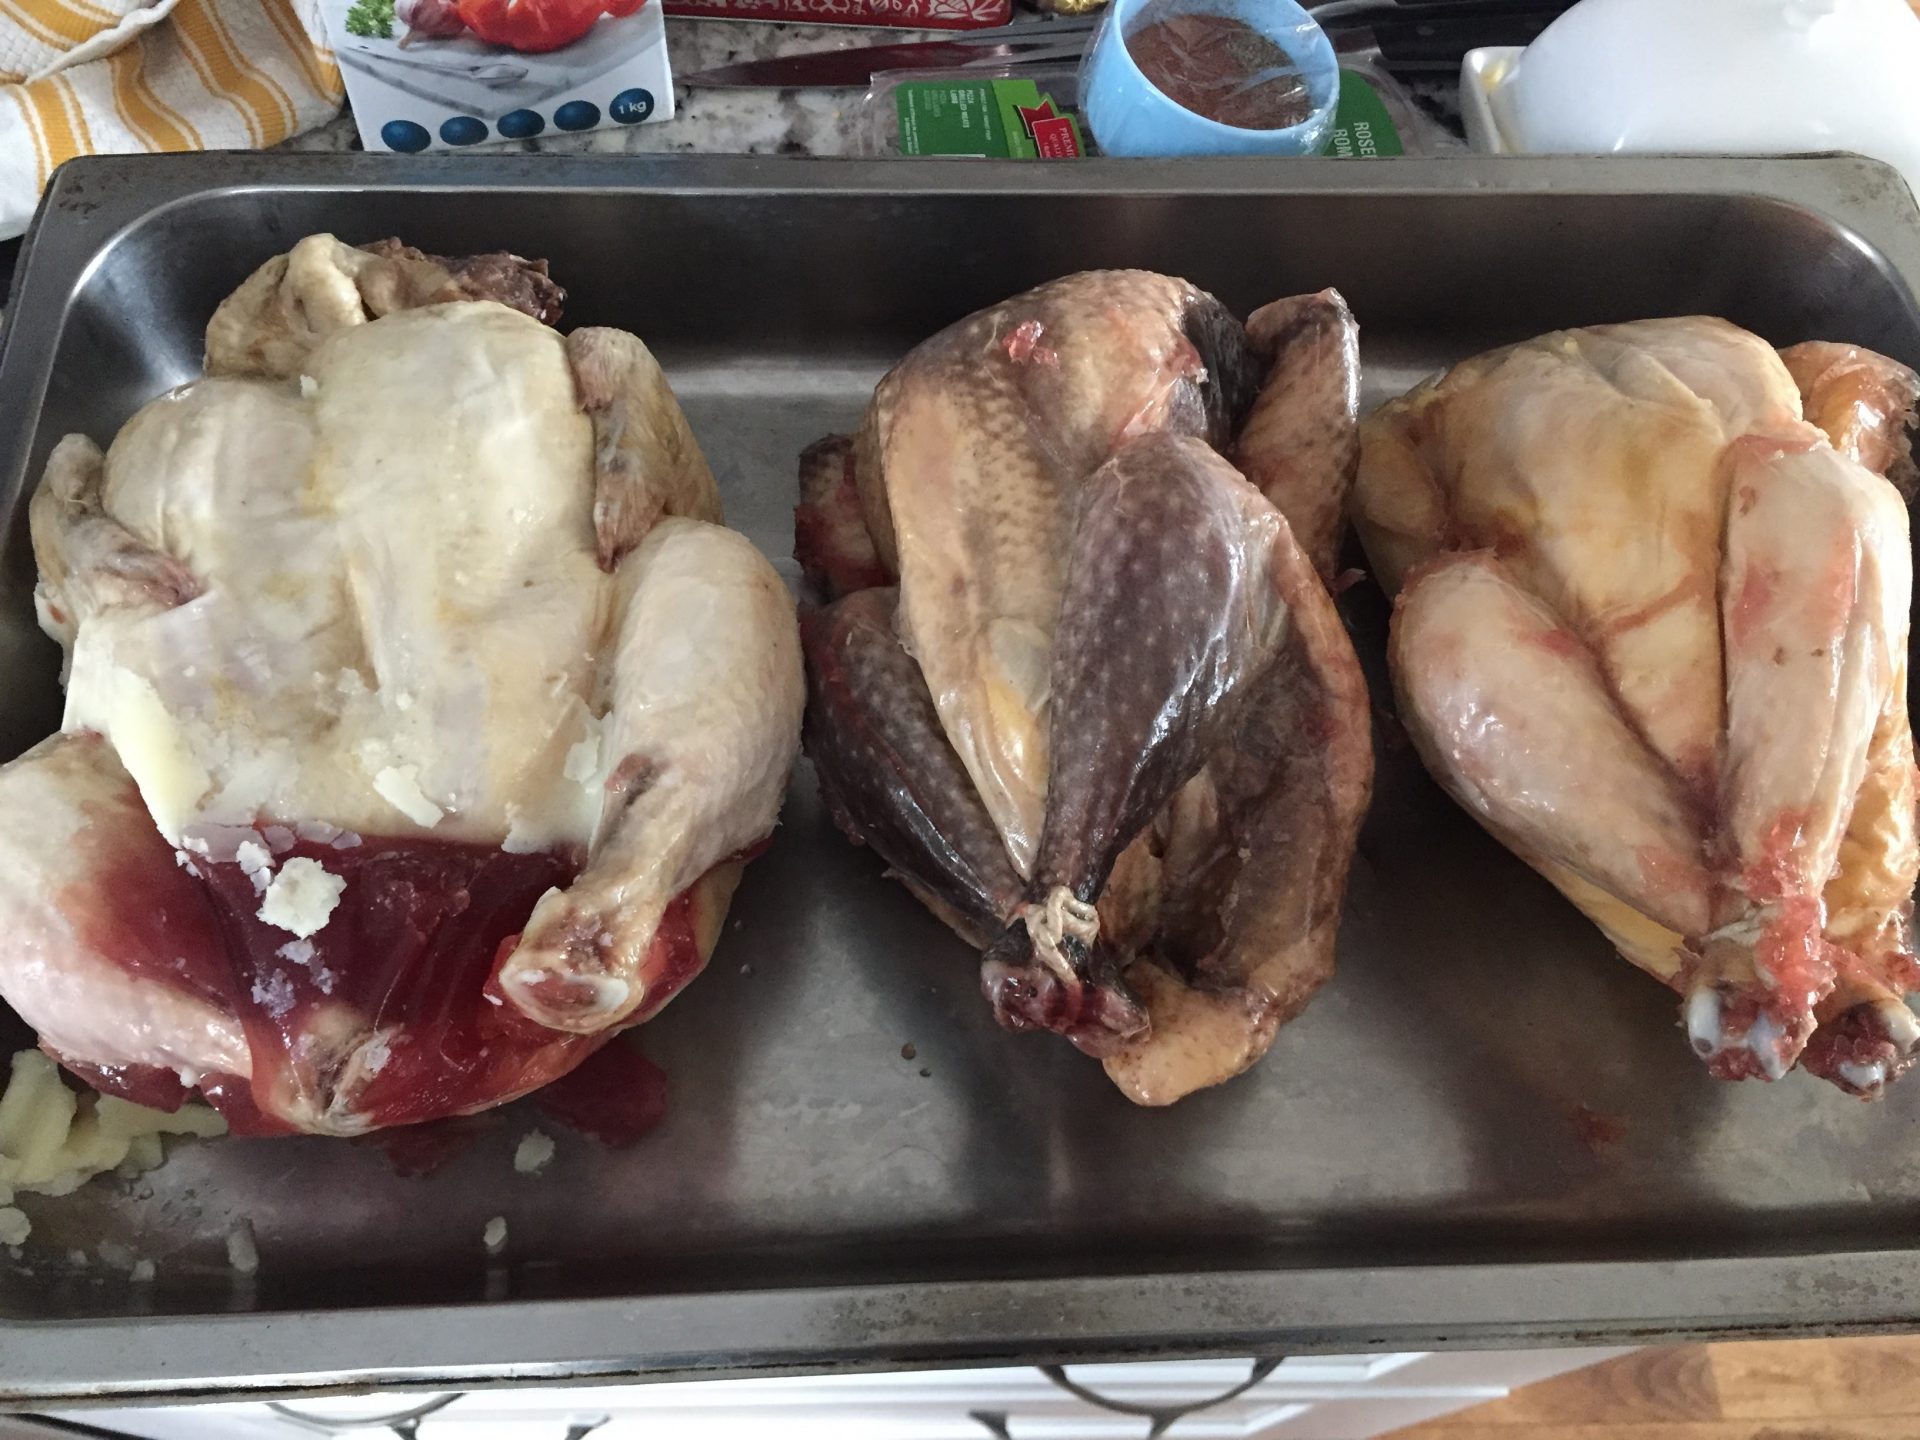 Post sous vide and pre browning I thought that all three birds looked quite tasty. Interesting to note is the gelatinous juice that formed with the capon on the left. In the oven this melted and created a fabulous pan juice.